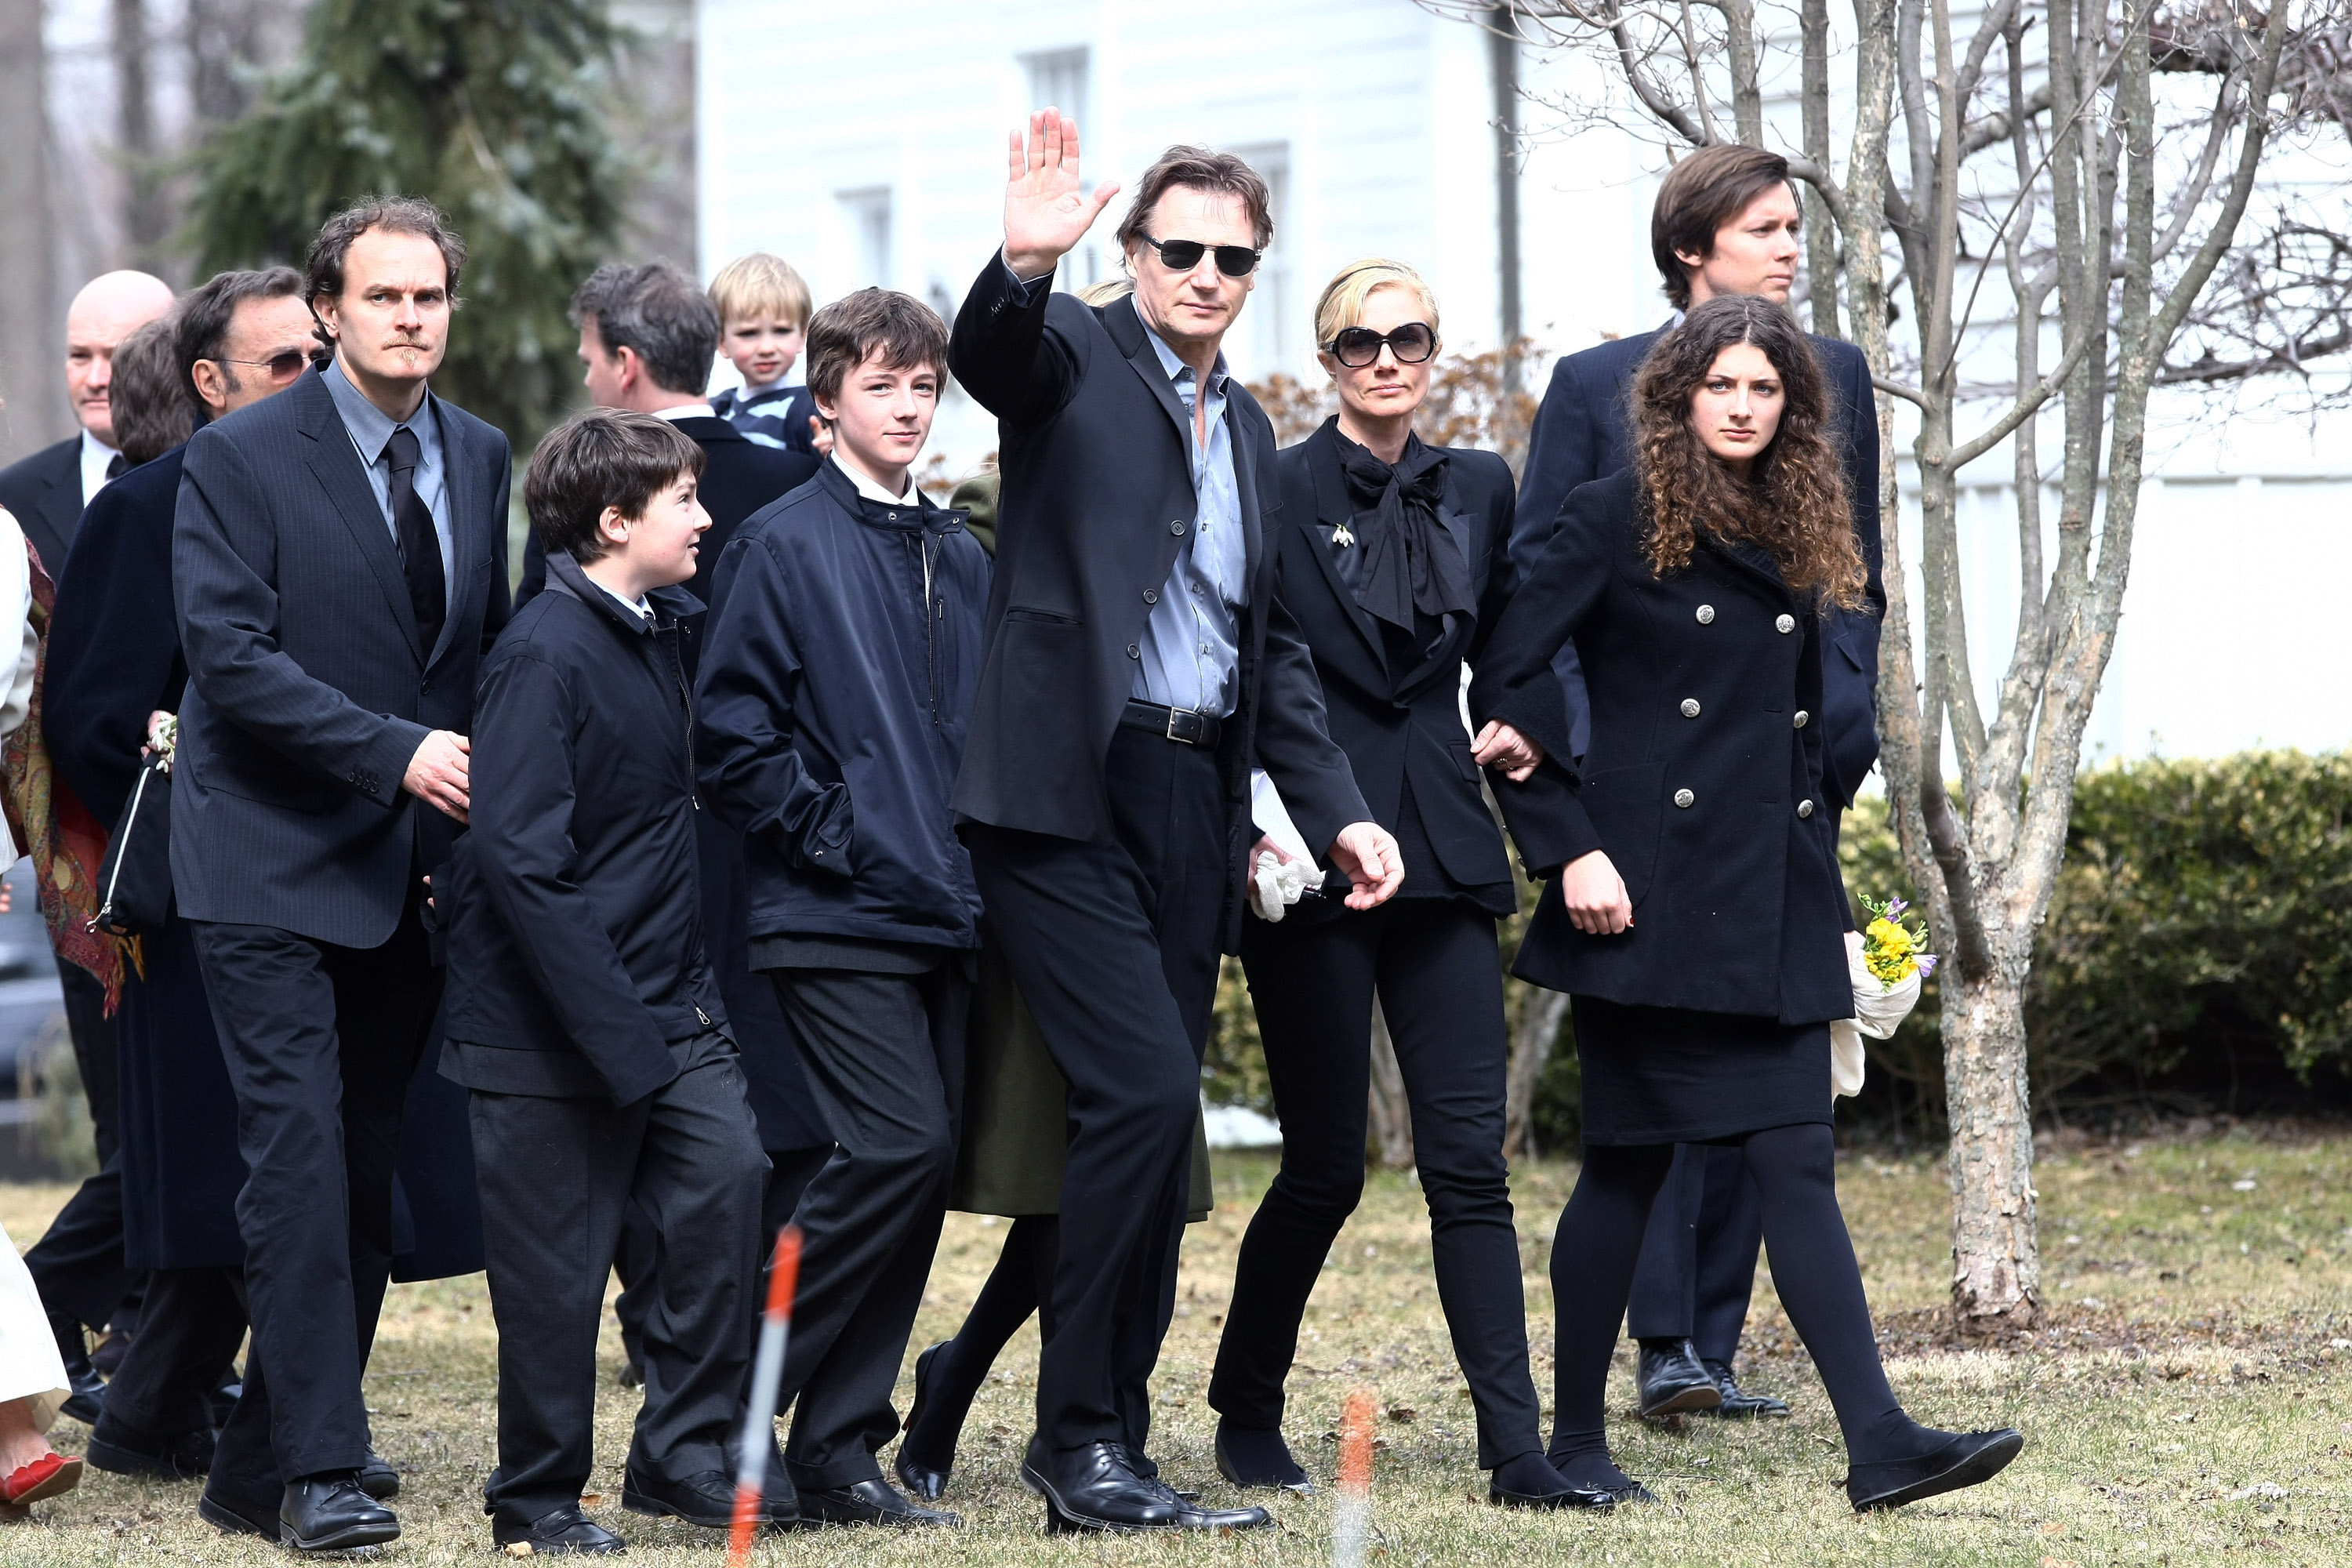 Liam Neeson with his sons Micheal and Daniel and the rest of his family at Natasha Richardson's funeral in New York in 2009 | Source: Getty Images